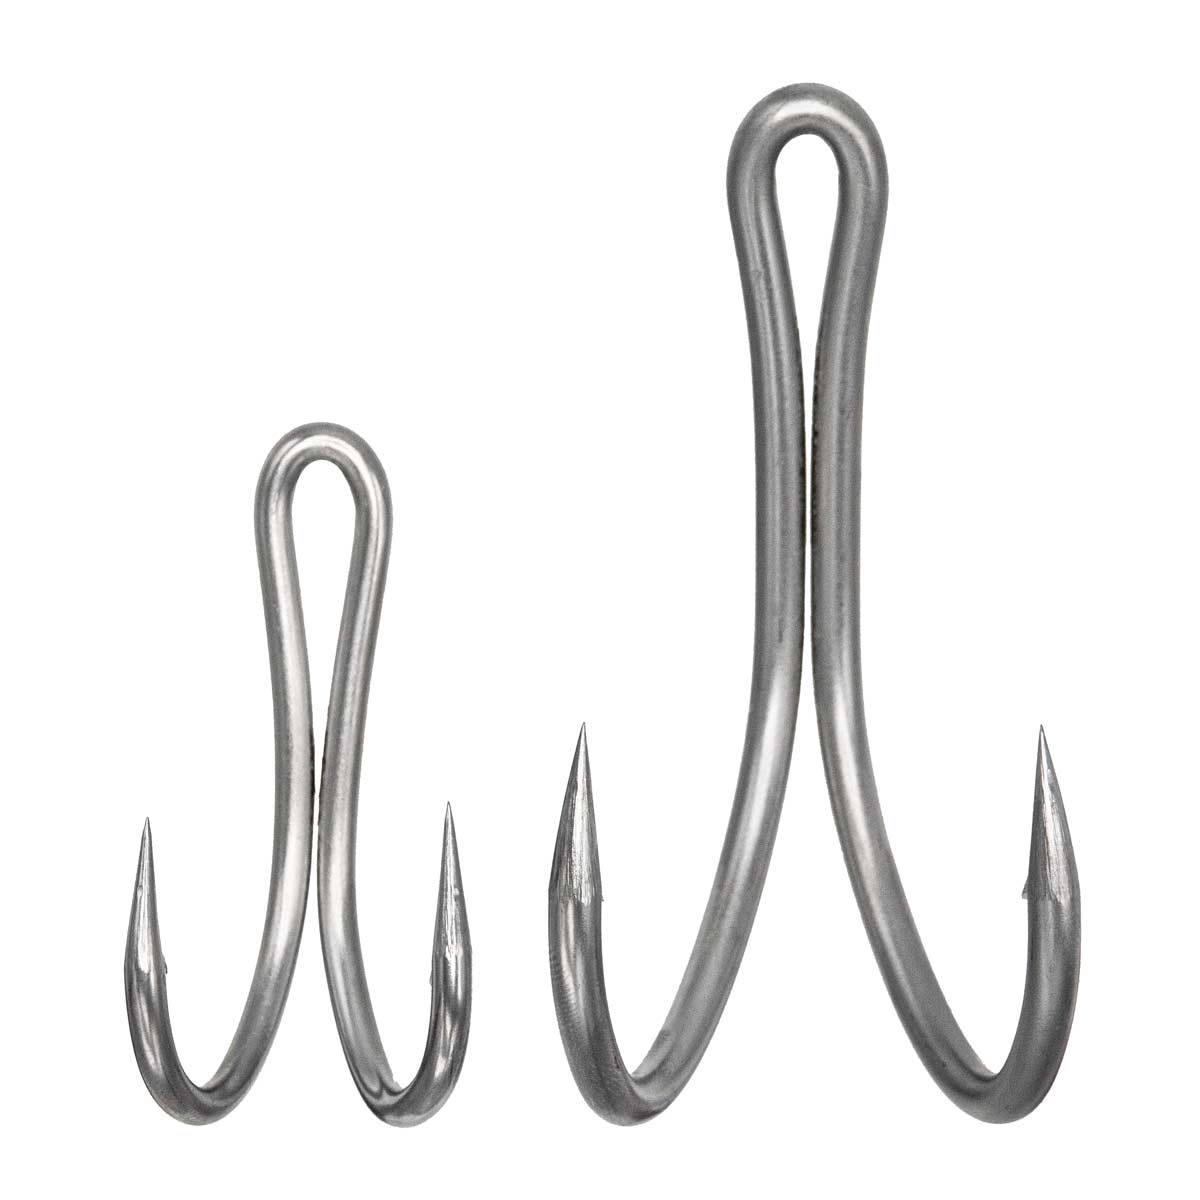 Rite Angler Stainless Steel 2X Ringed Circle Tuna Hook 13/0, 14/0, 15/0,  16/0, 18/0 Offshore Big Game Saltwater Fishing (2 Pack) 